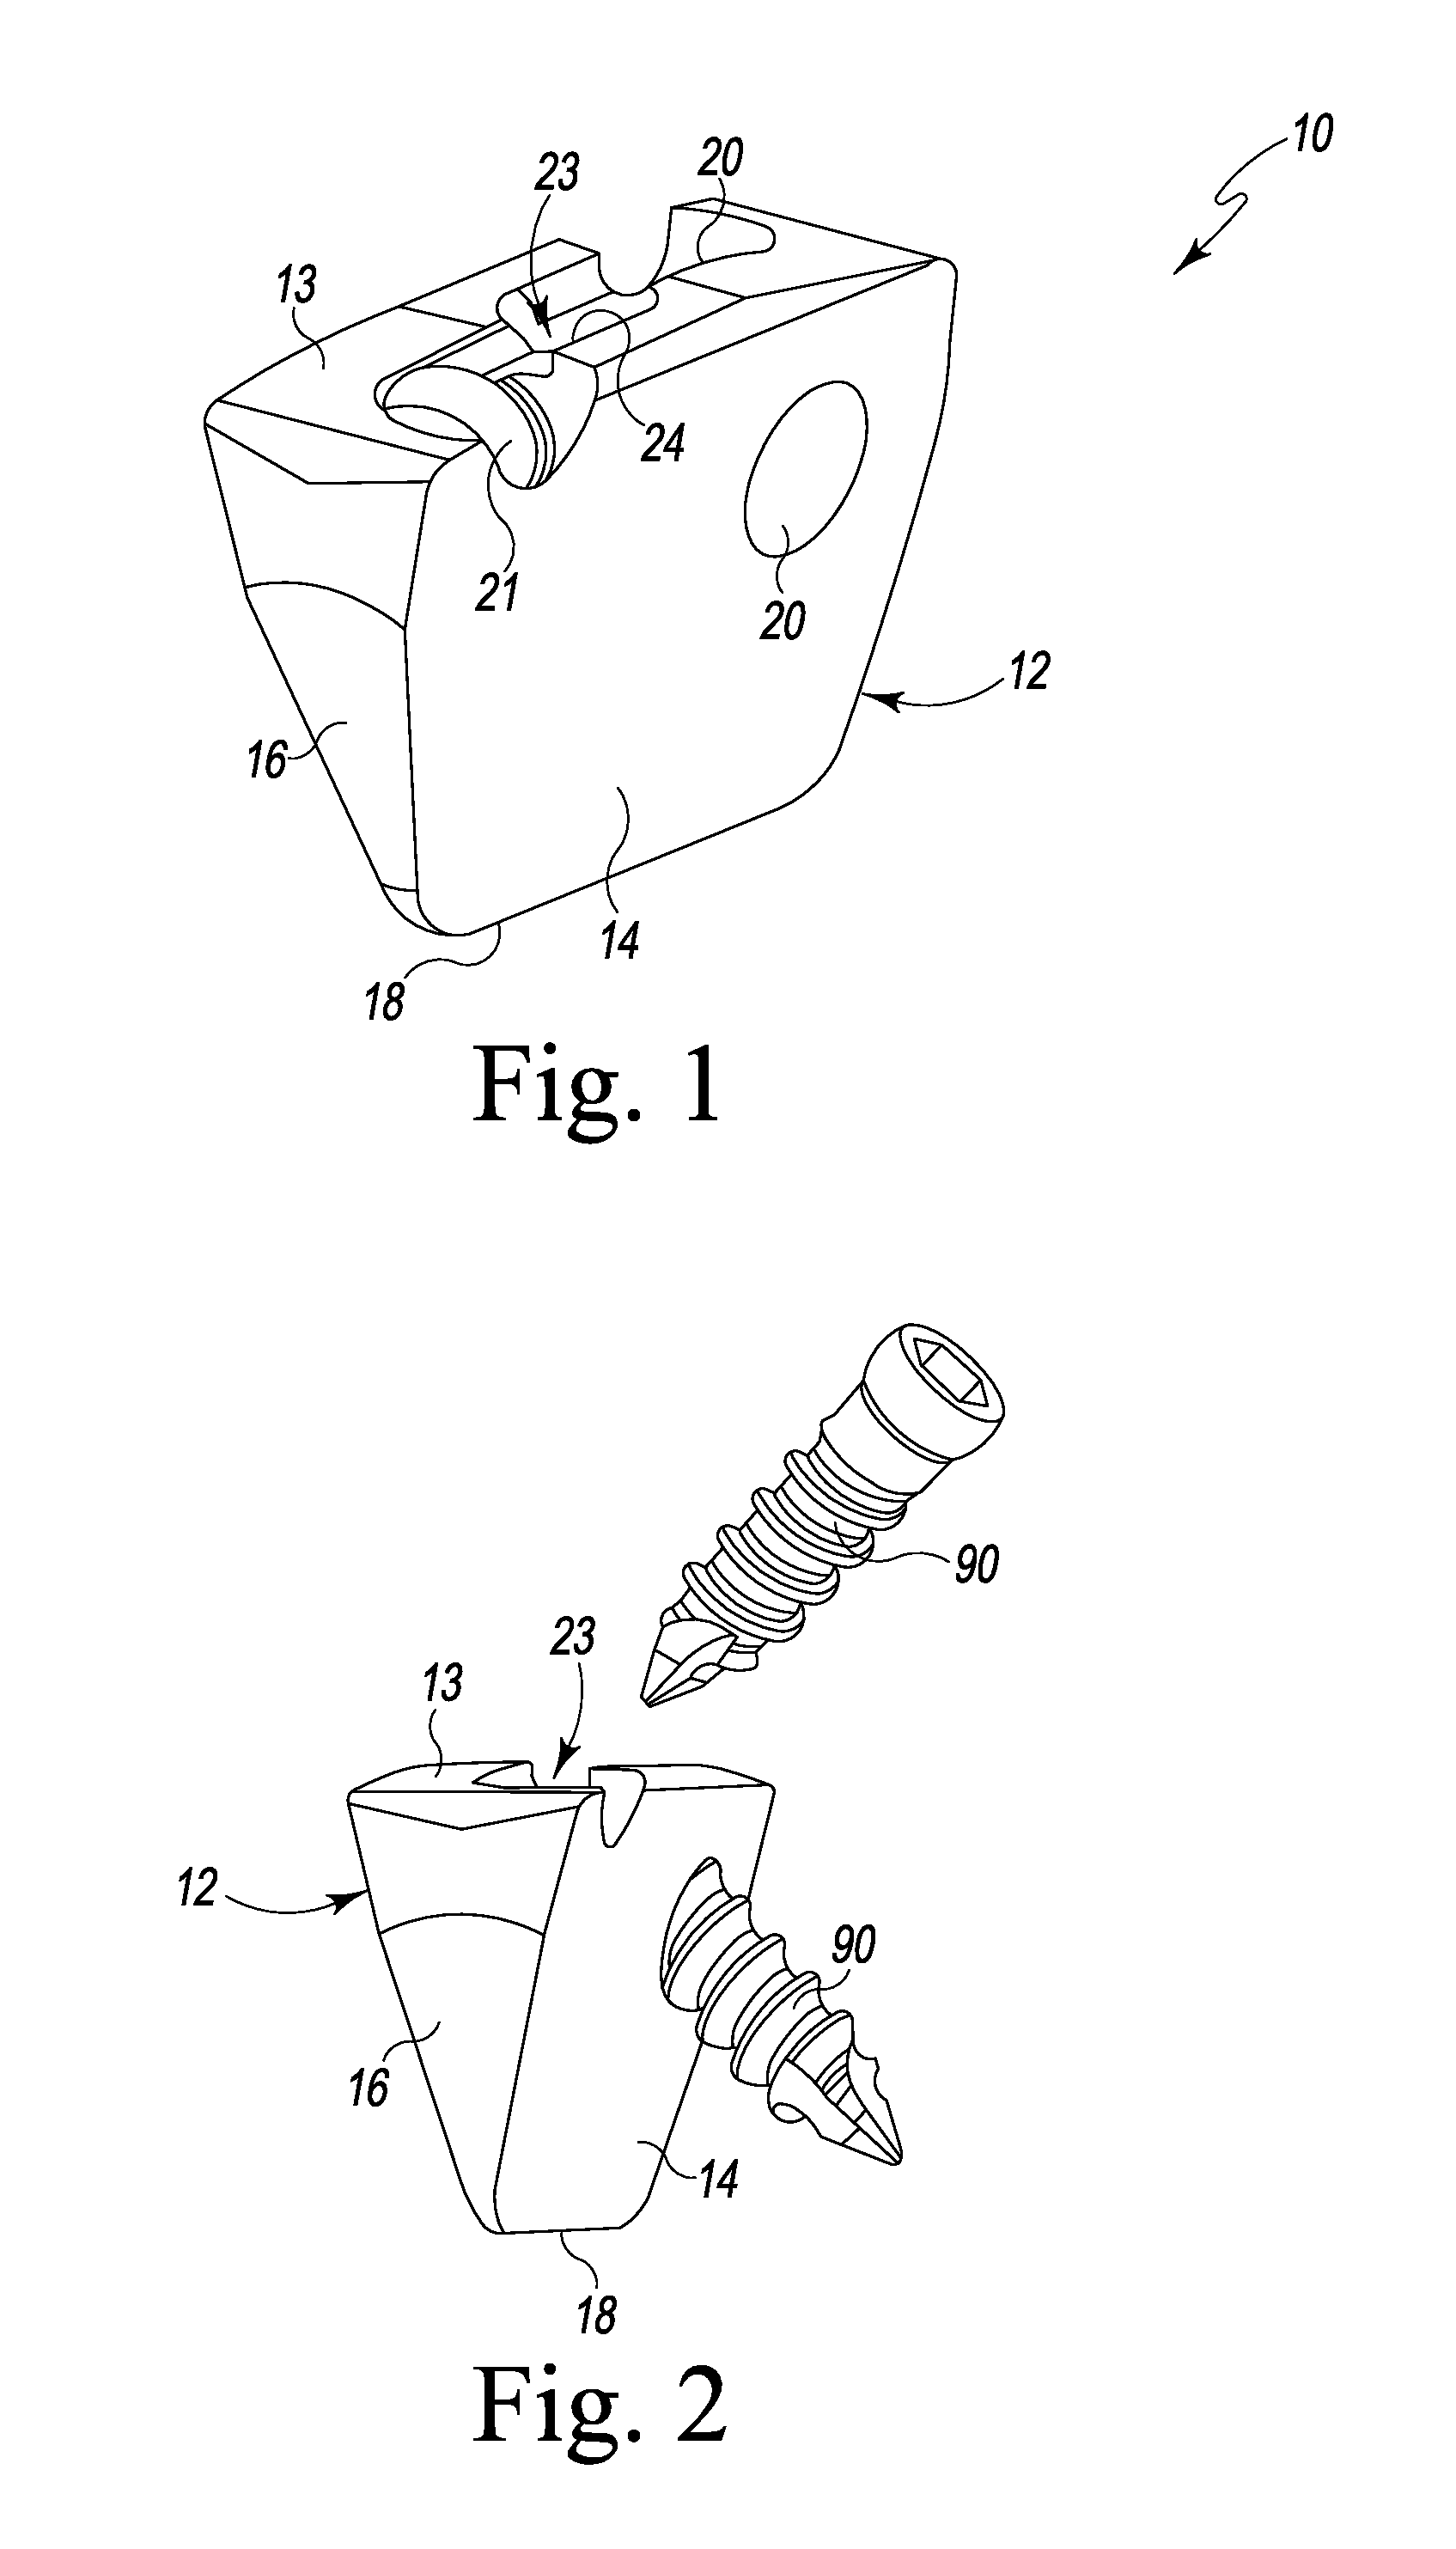 Foot Implant For Bone Fixation